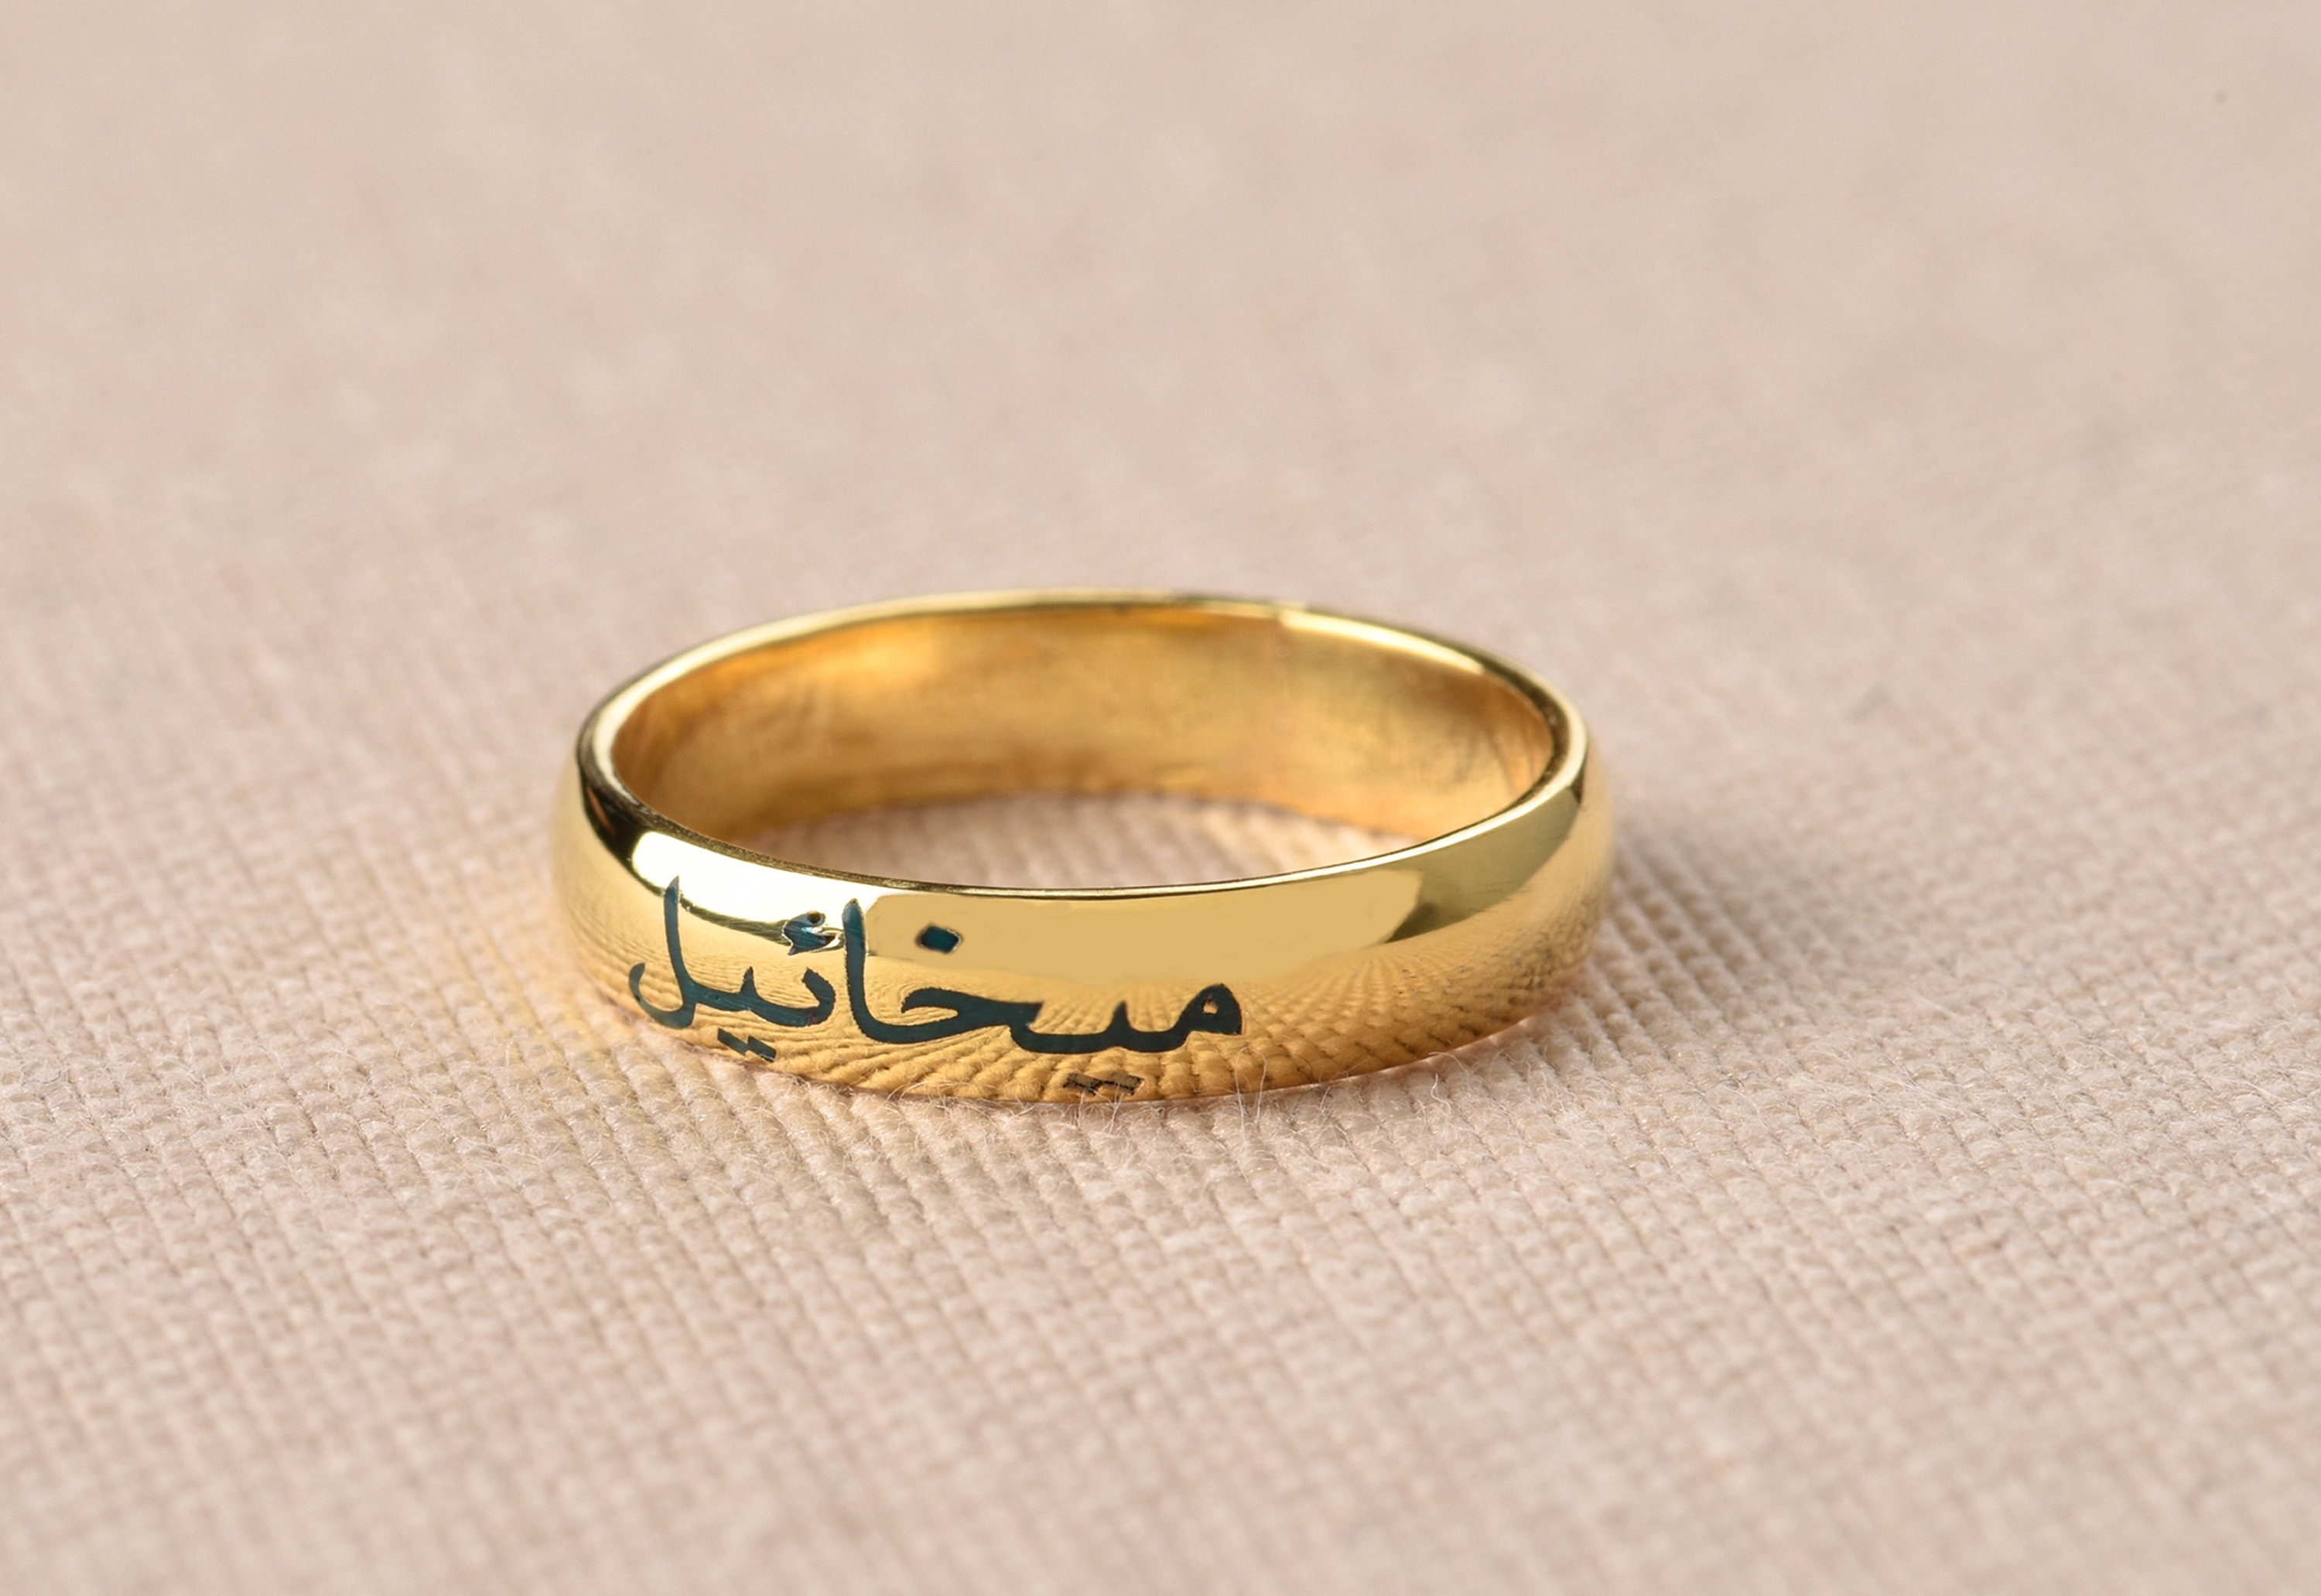 Latest Arabic 22k Gold Ring Designs With Weight || The Design || #shorts -  YouTube